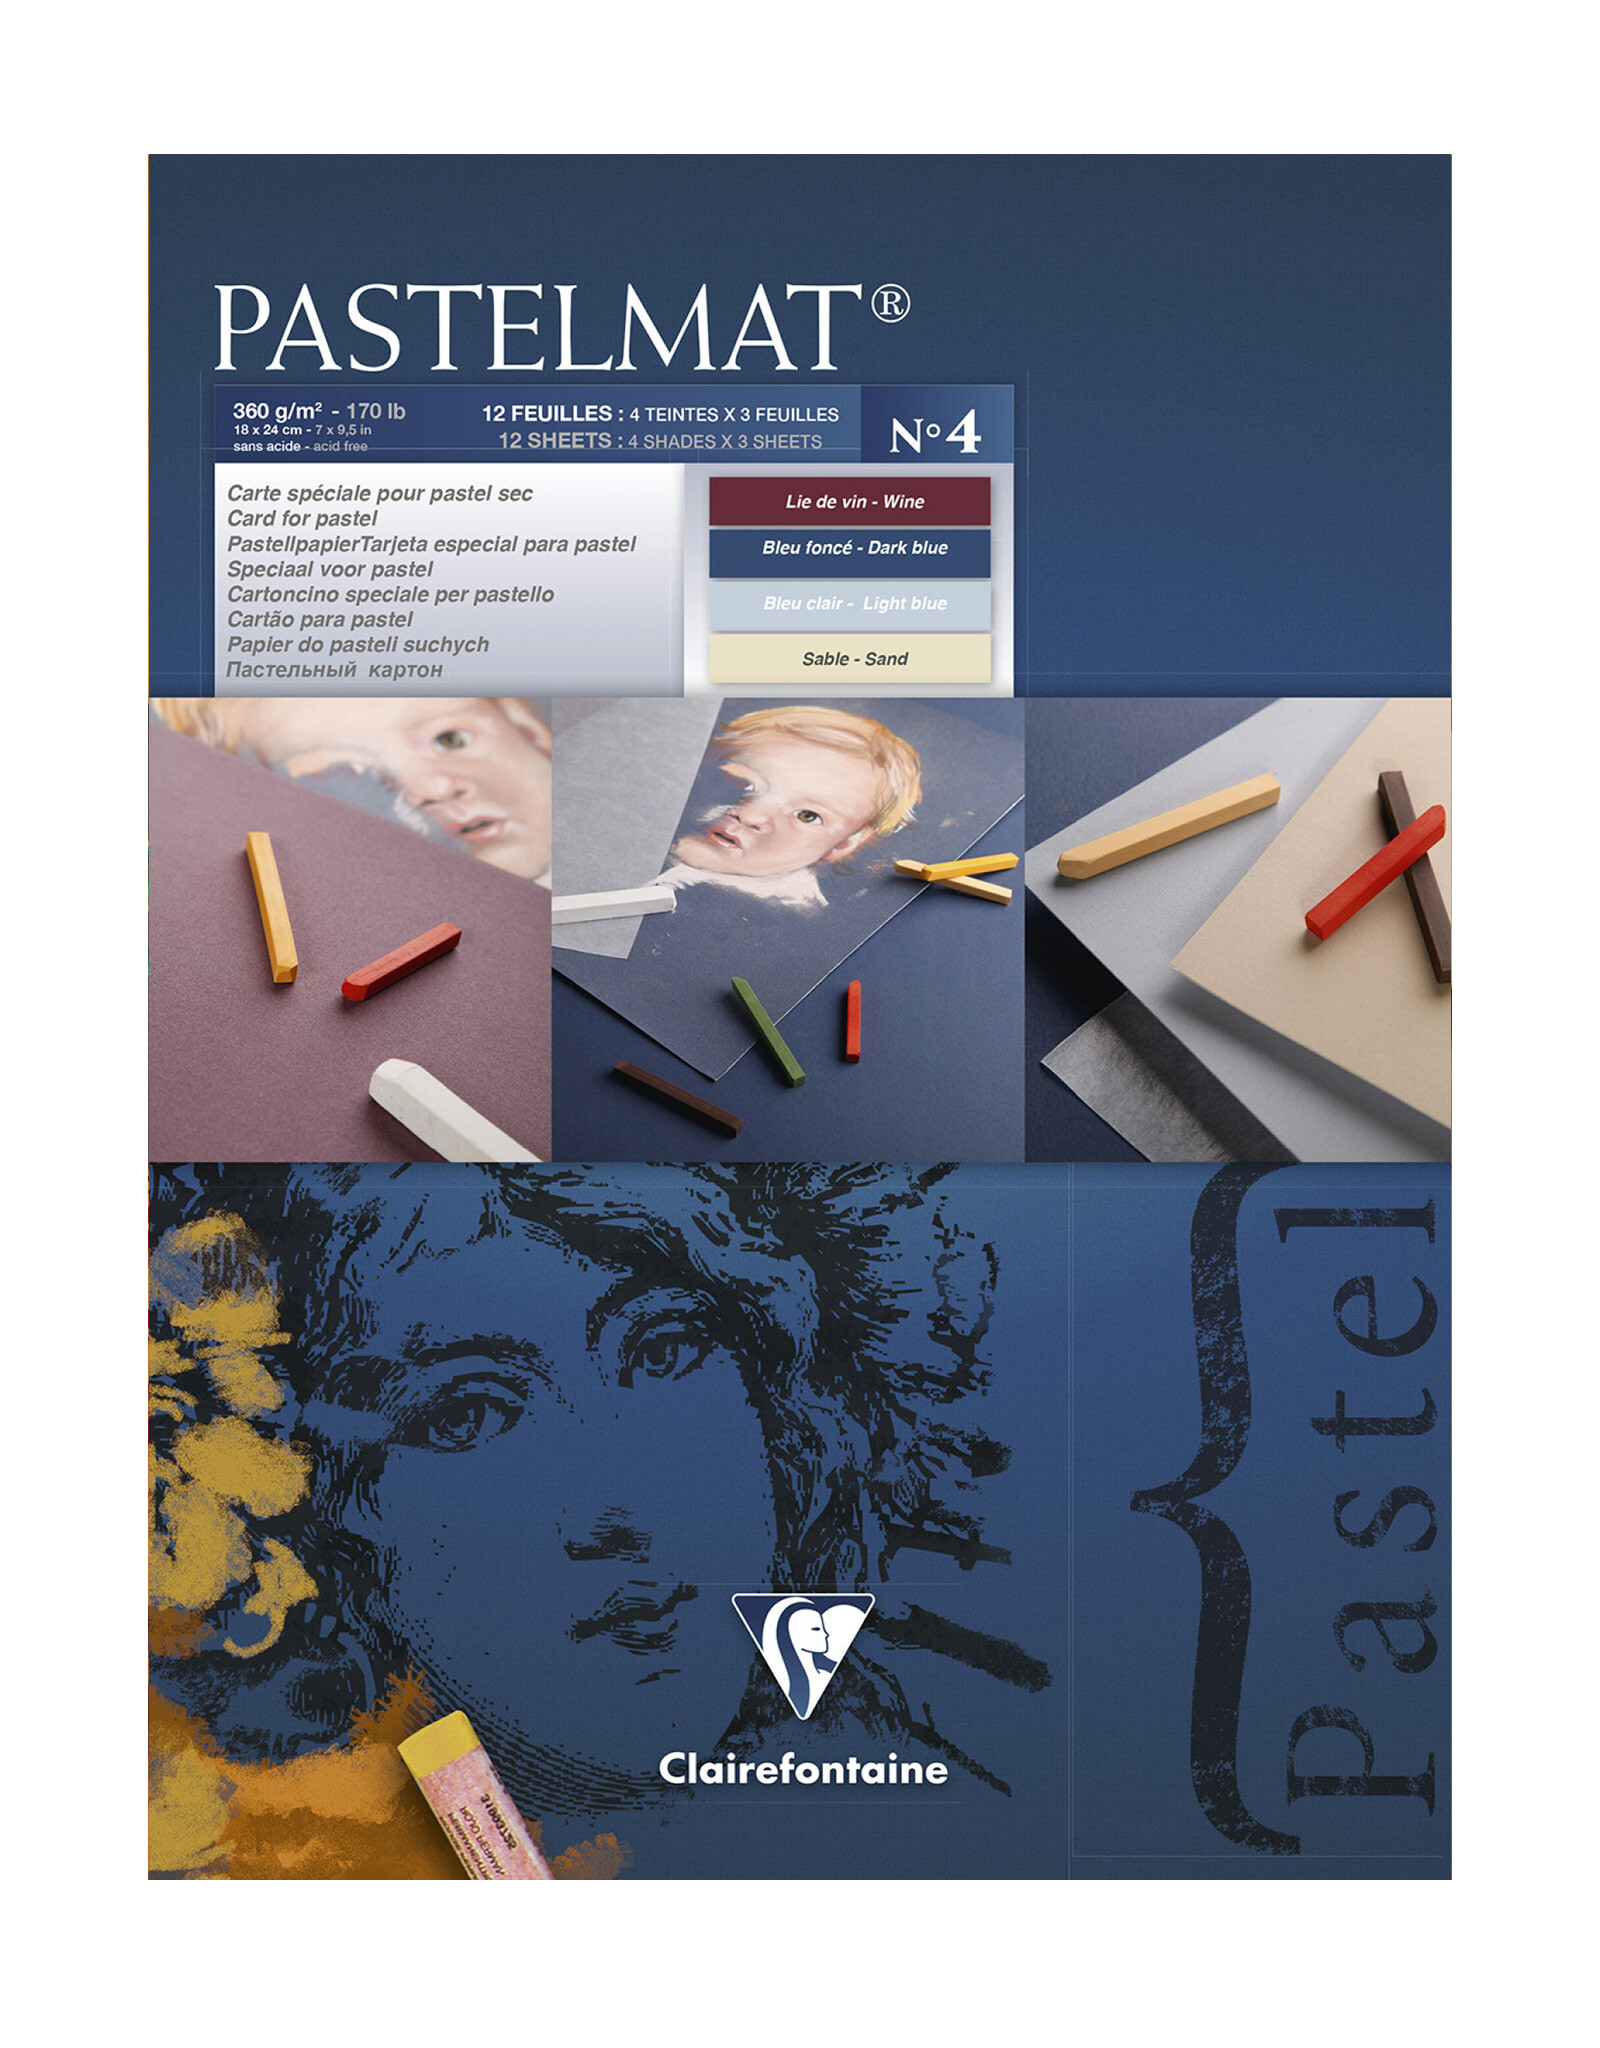 What's the difference between Pastelmat & Pastelmat board? 